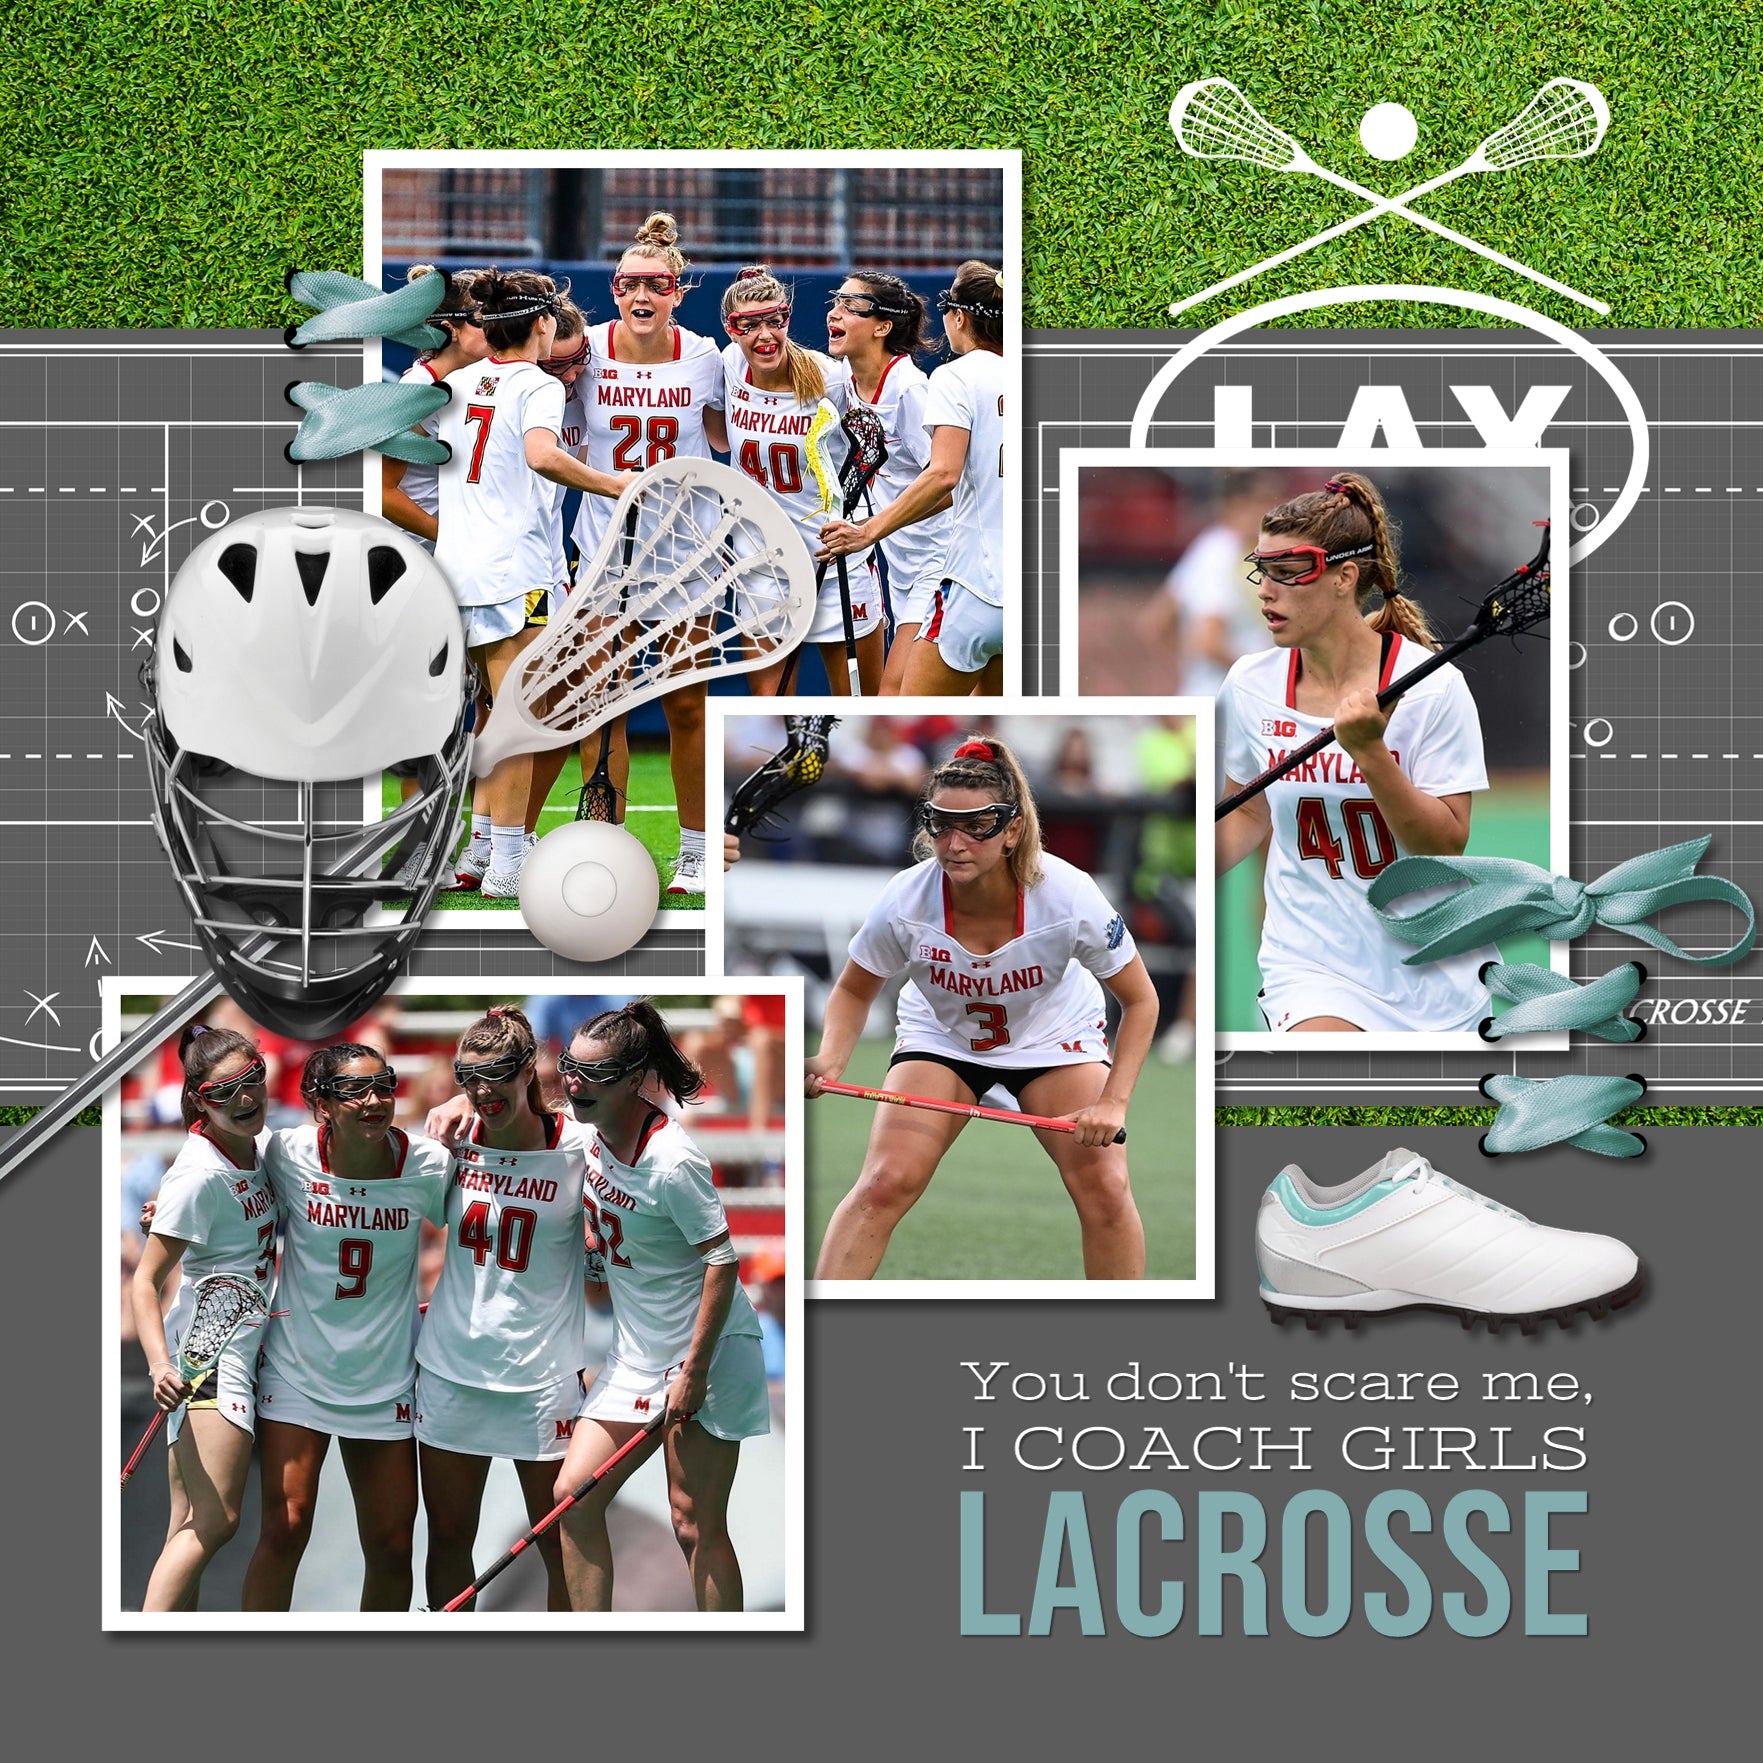 This clean and refreshing Ladies Lacrosse Digital Scrapbook Kit covers all aspects of lacrosse in a photo-realist style that would appeal to anyone. Many of the digital art embellishments are neutral and can be used for men’s lacrosse as well. 